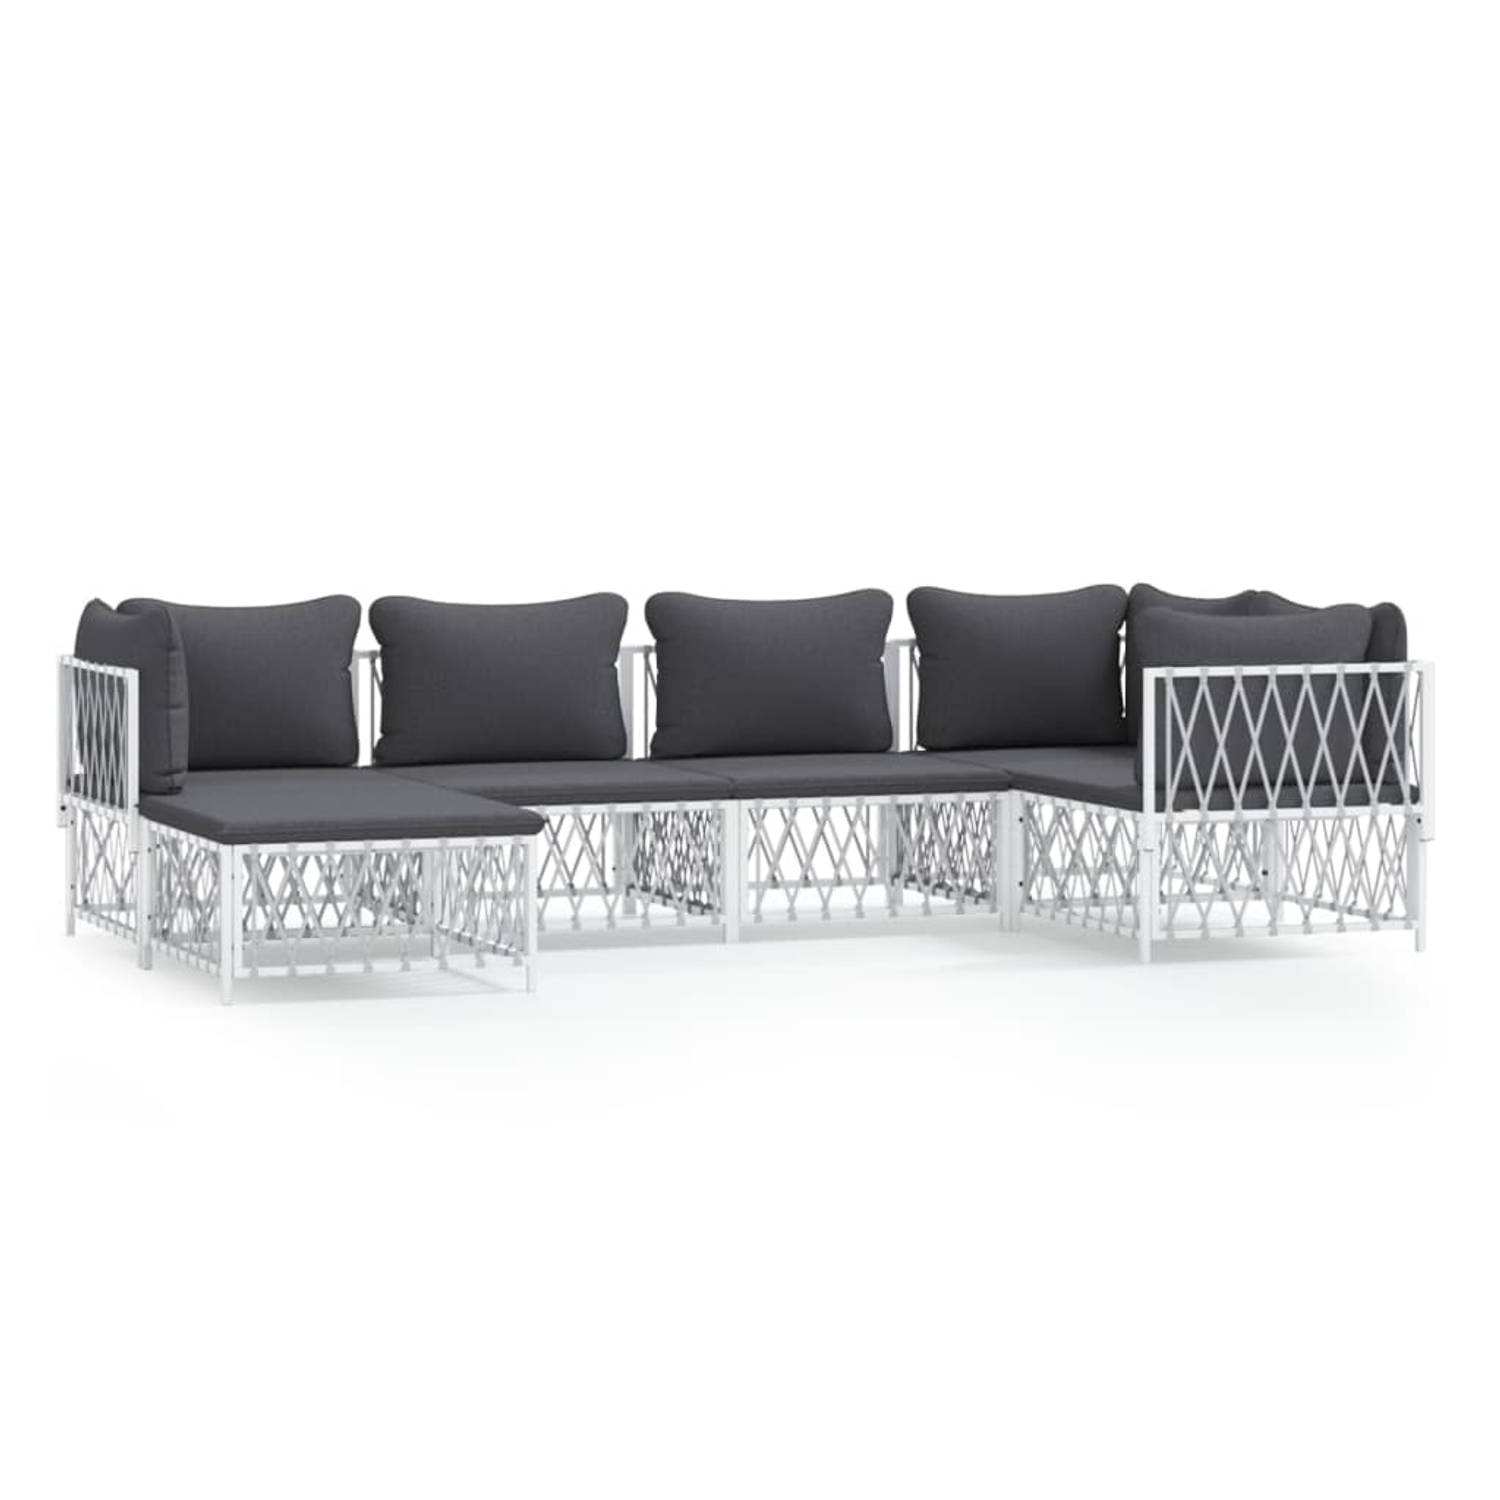 The Living Store 6-delige Loungeset met kussens staal wit - Tuinset